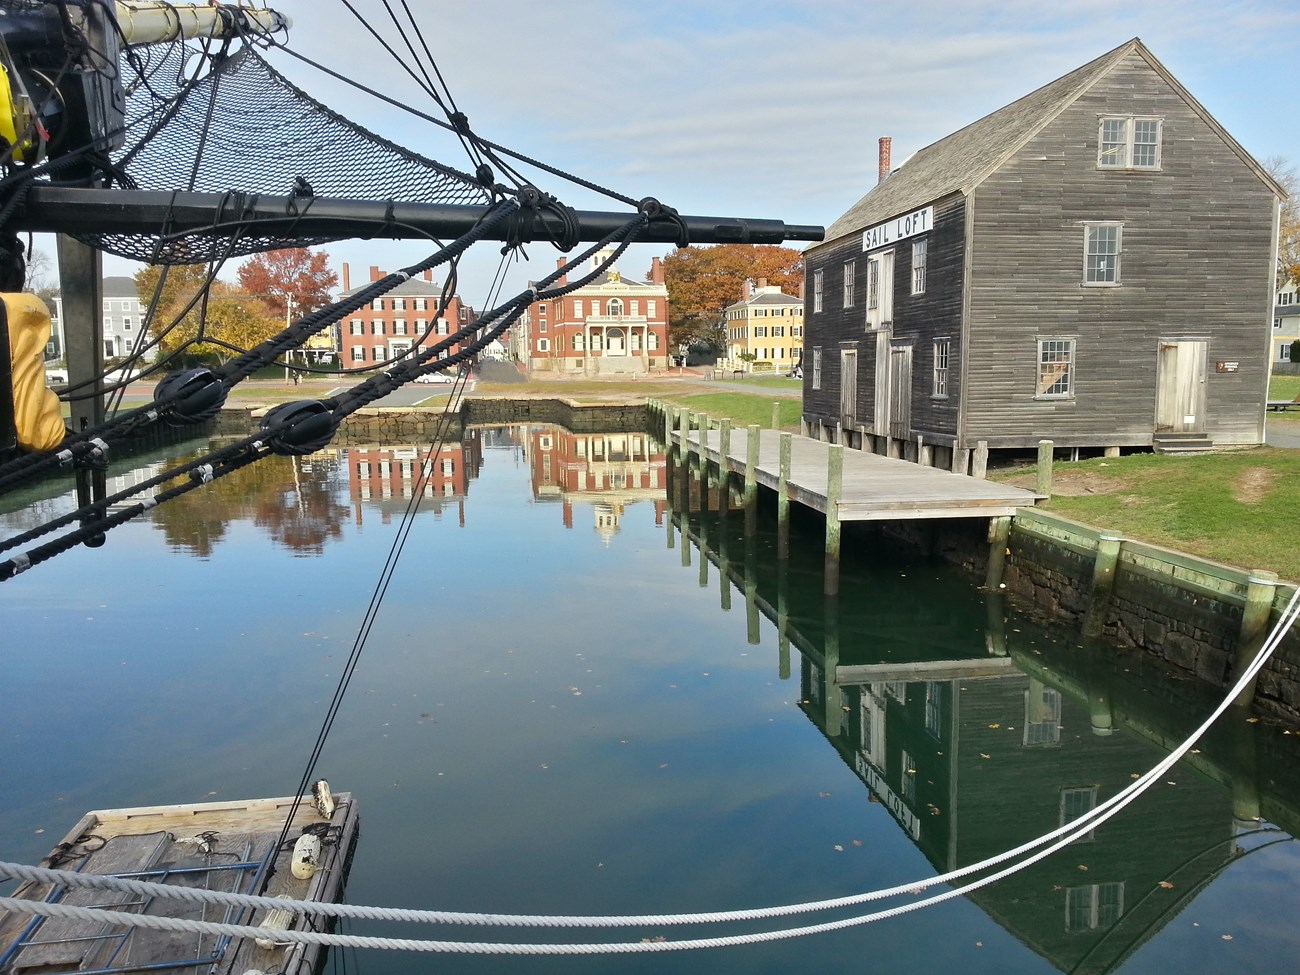 Historic buildings made of brick and wood surround a wharf with the water reflecting their image.